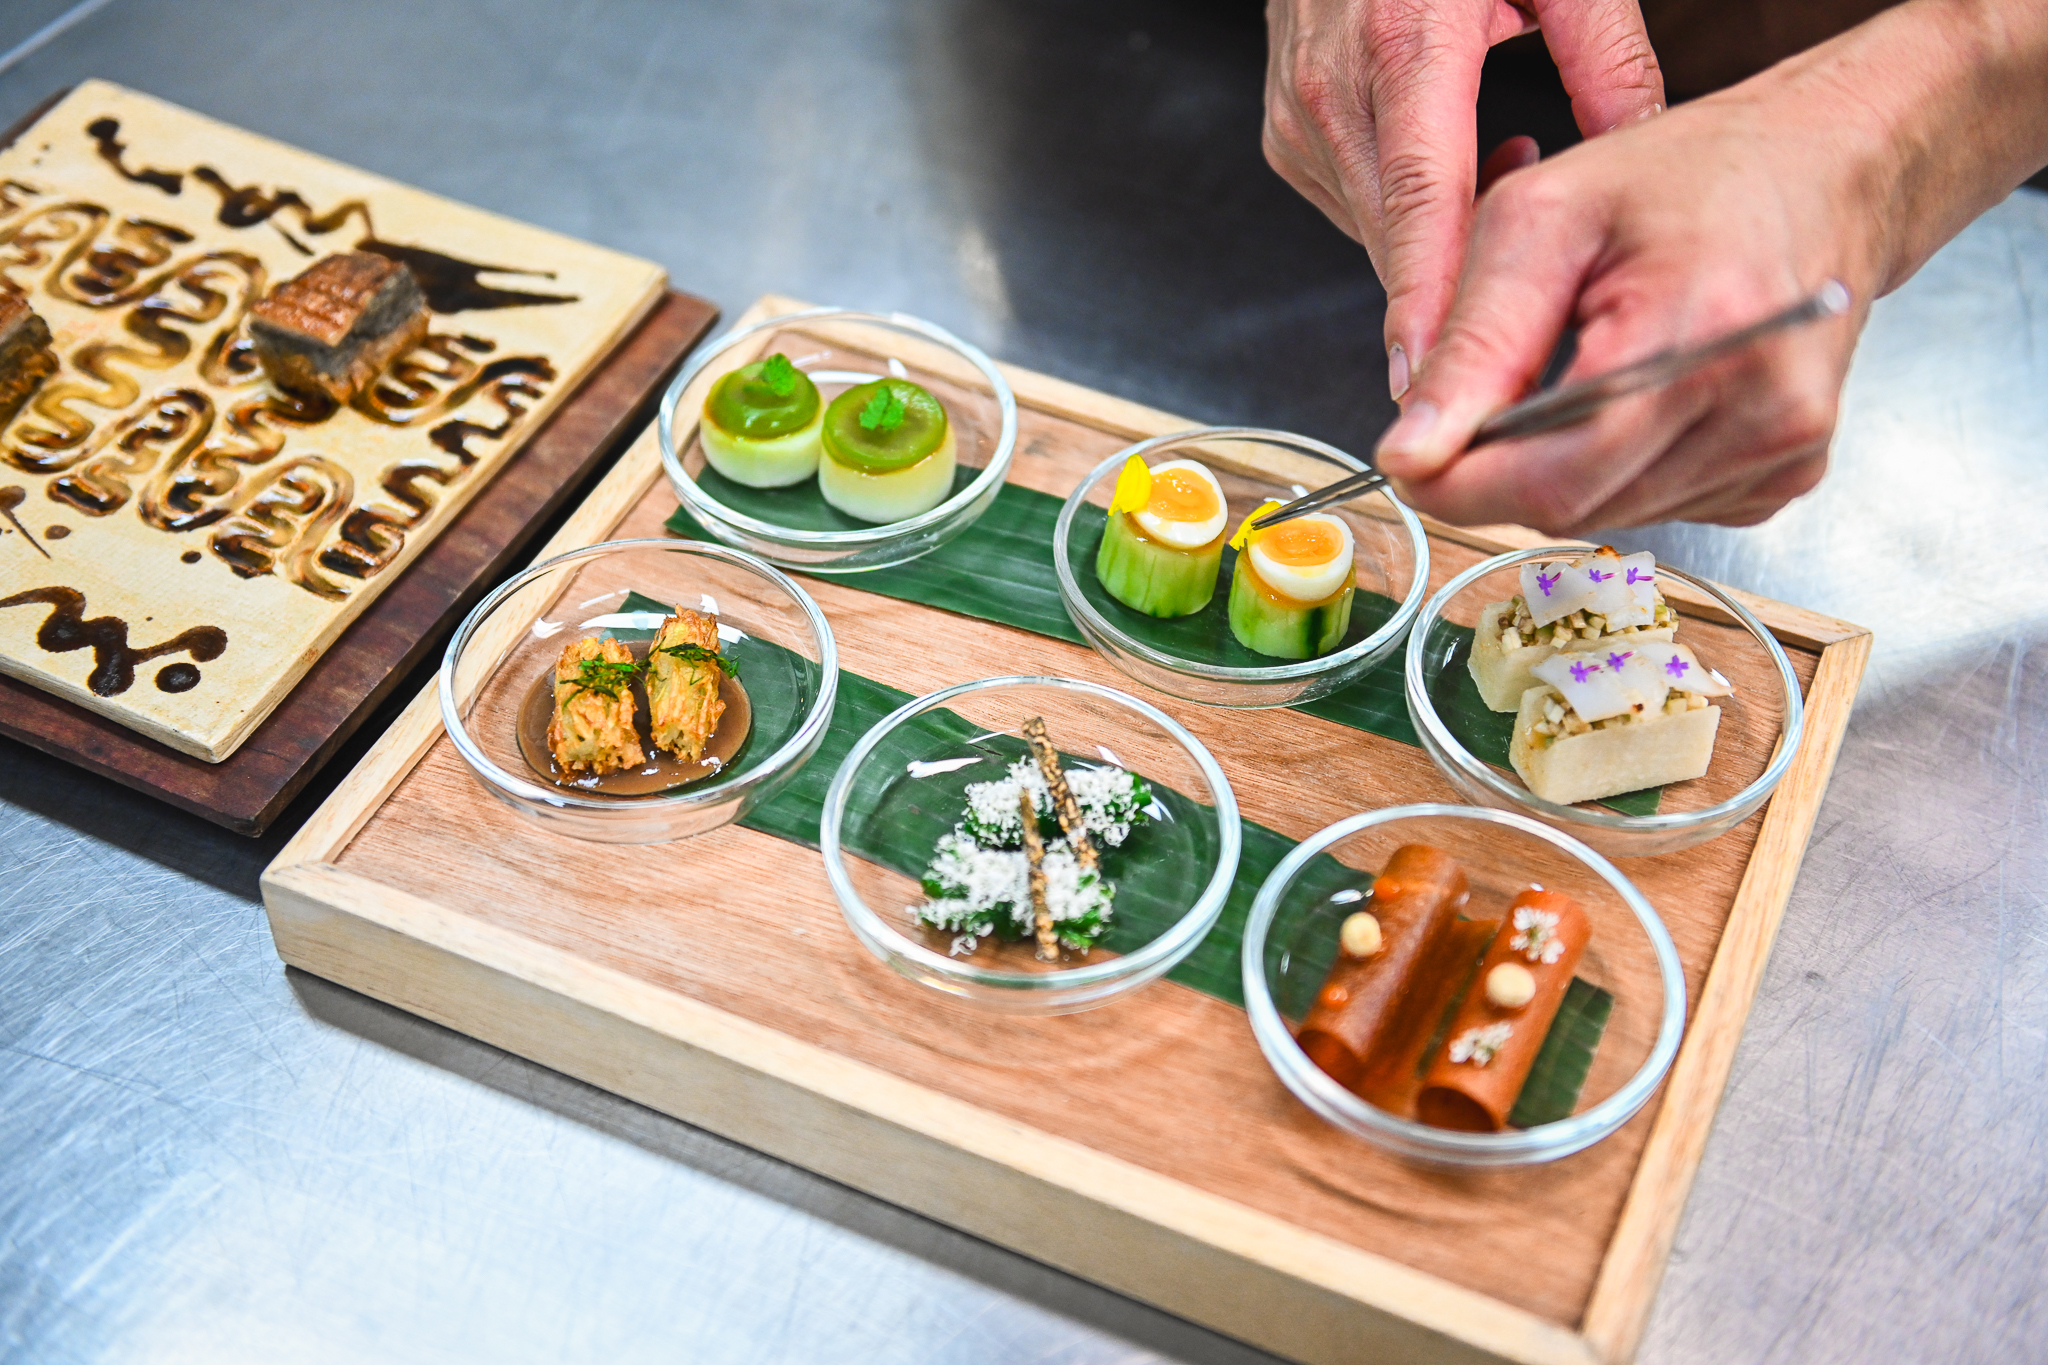 A chef plates a large board containing six colorful dishes.